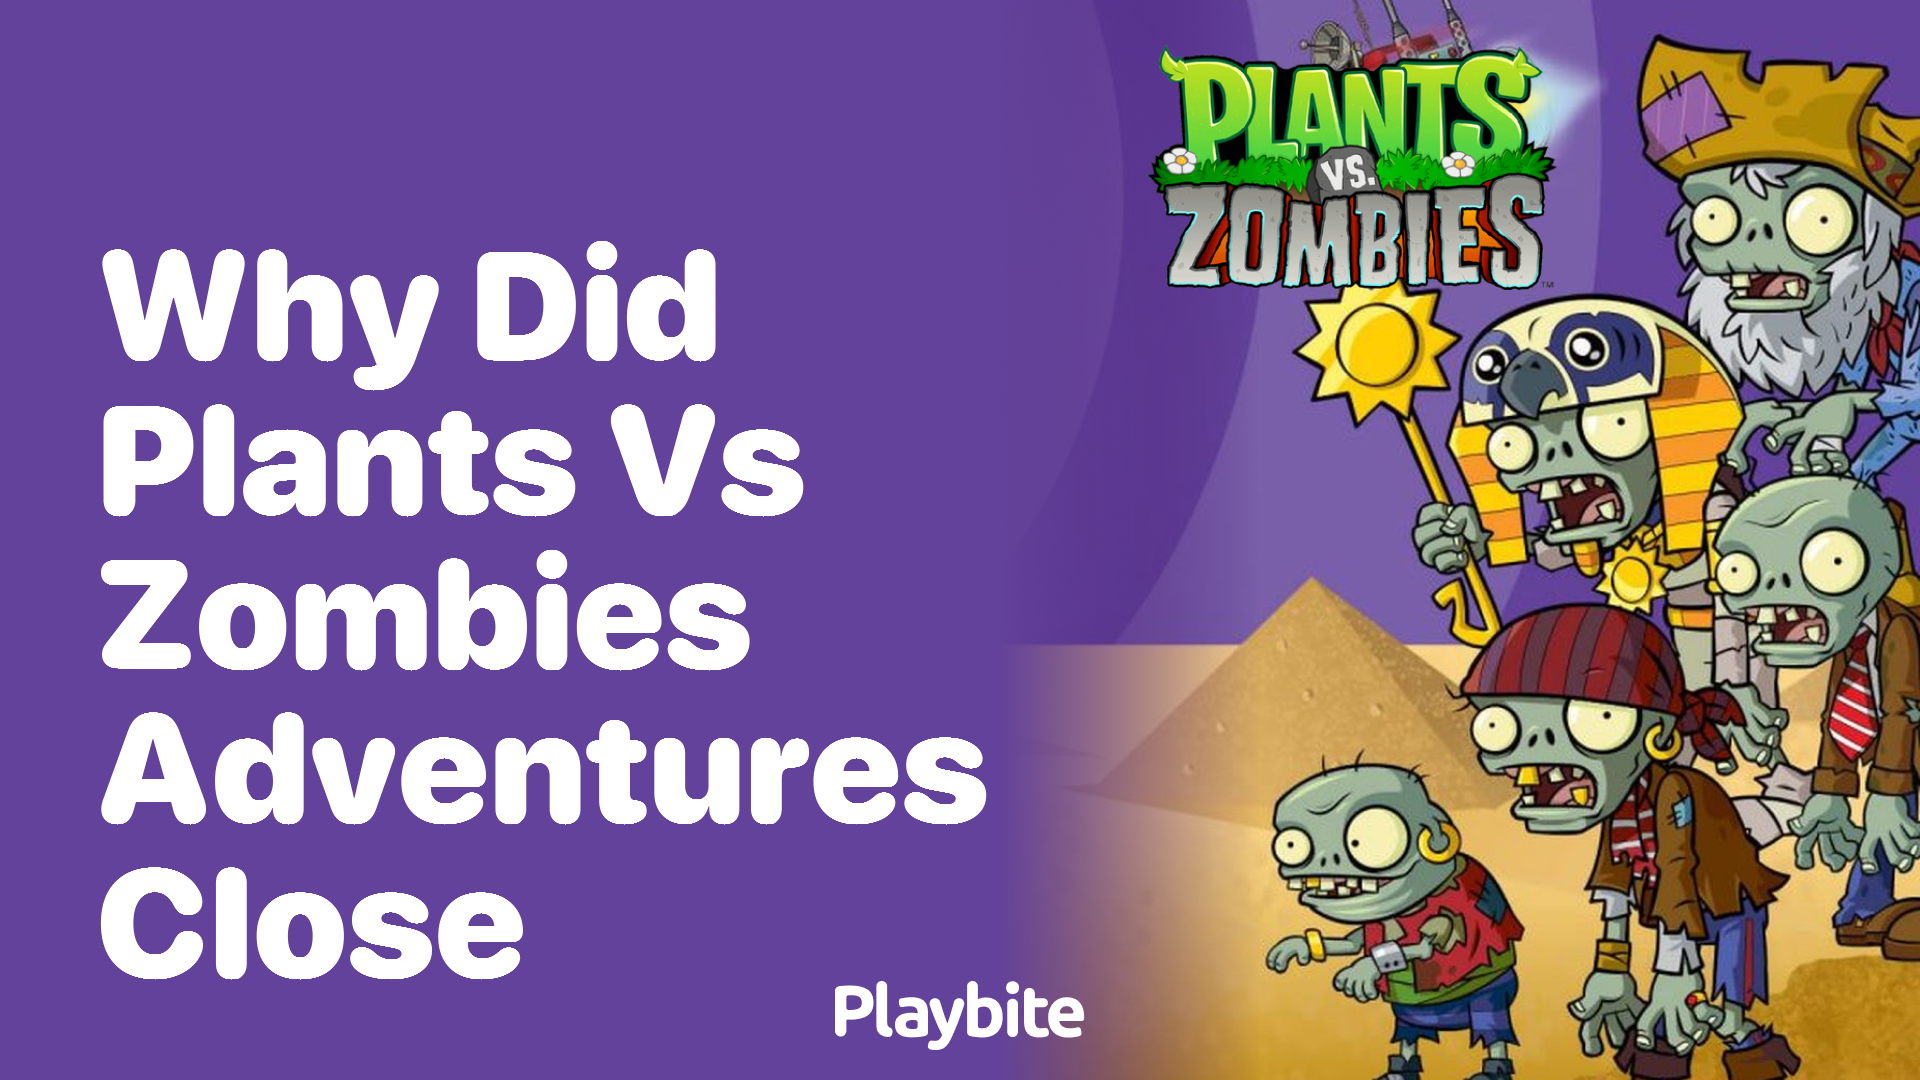 Why did Plants vs Zombies Adventures close?